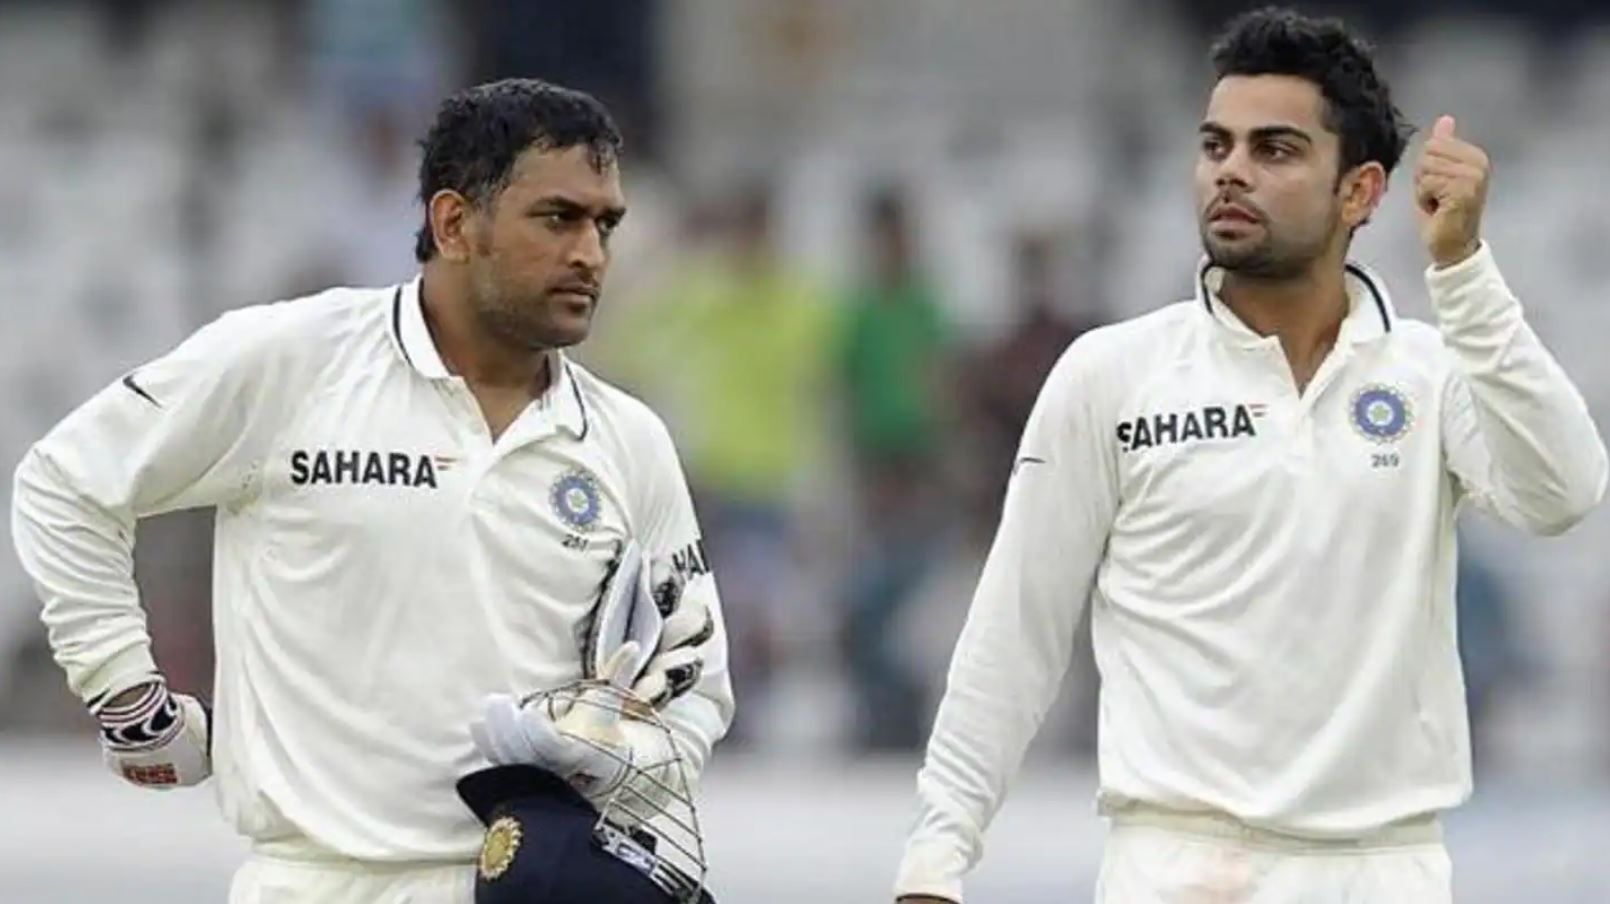 5 Team India Skippers Who Have Lost The Most Number Of Tosses In Test Cricket